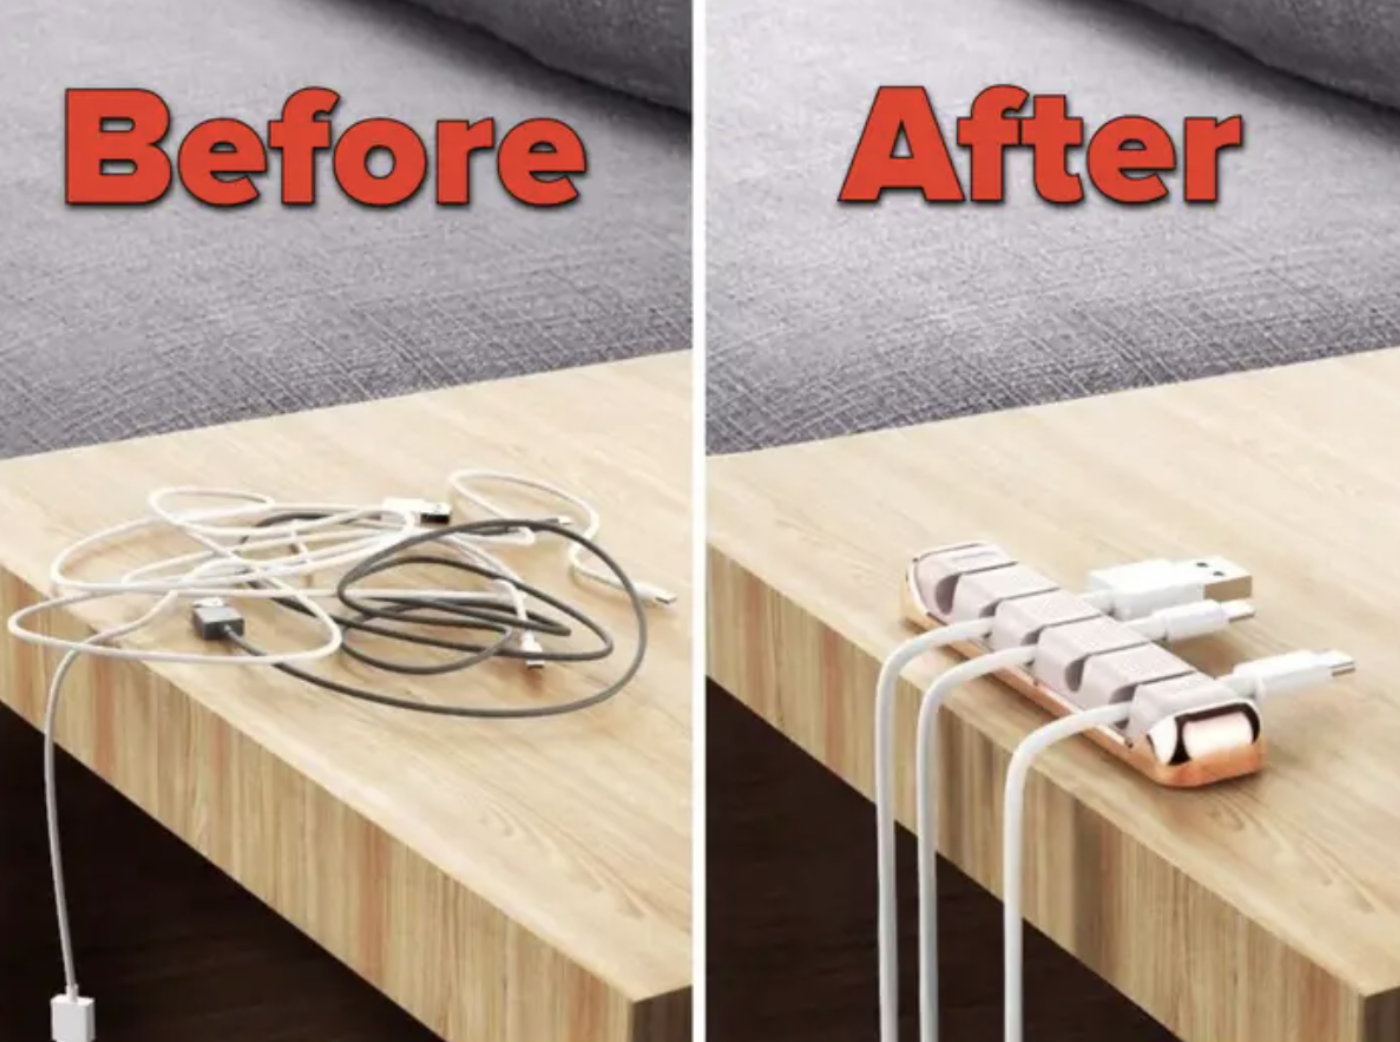 A before and after of tangled charging cords messy and then organized in the cord clip